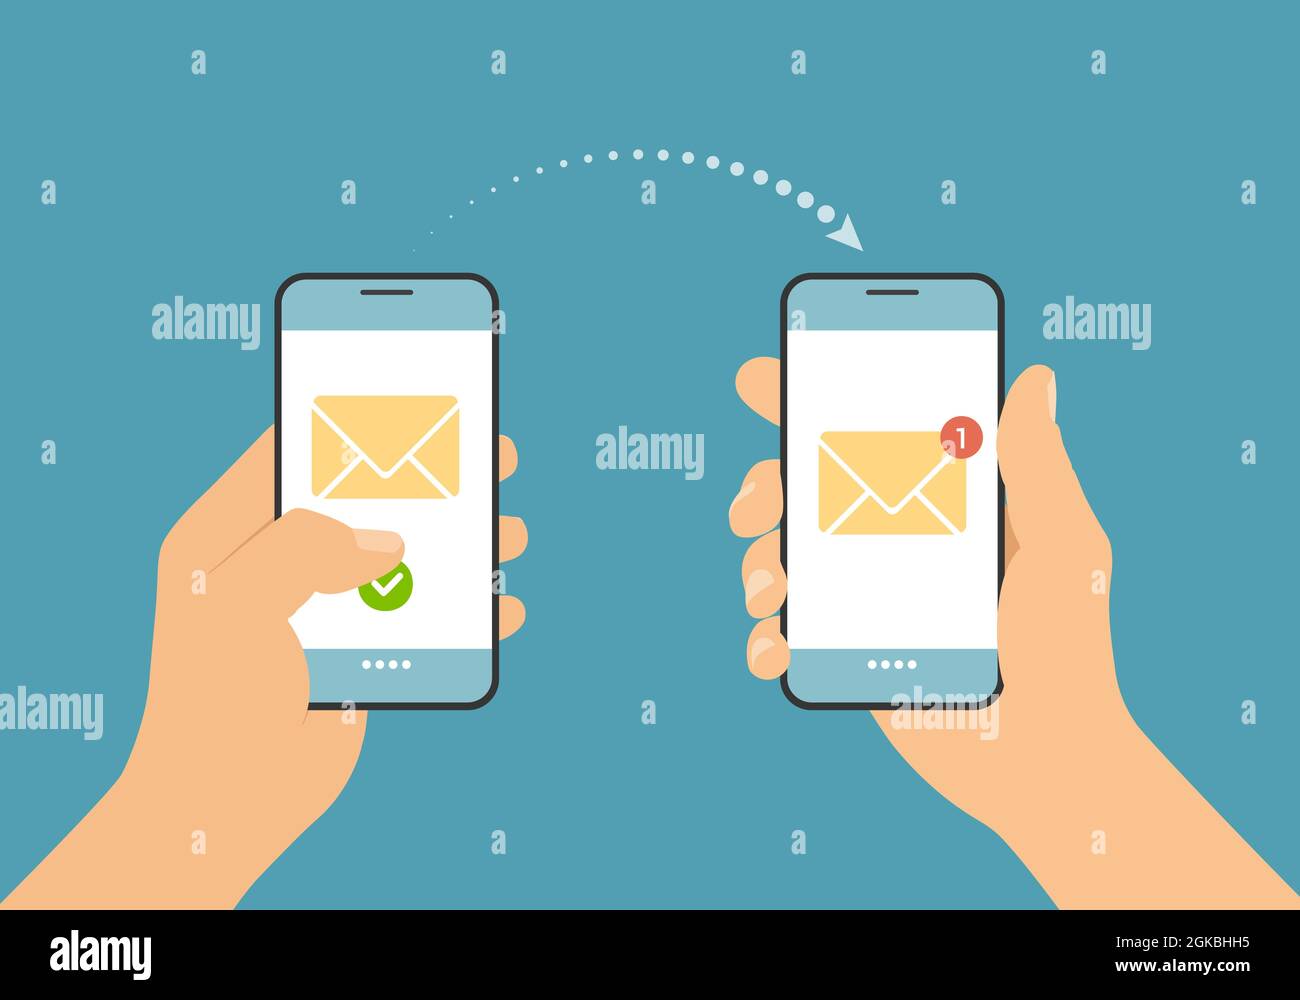 Flat design illustration of a hand holding a smartphone and sending a text message or email. Notification with envelope on mobile phone display - vect Stock Vector